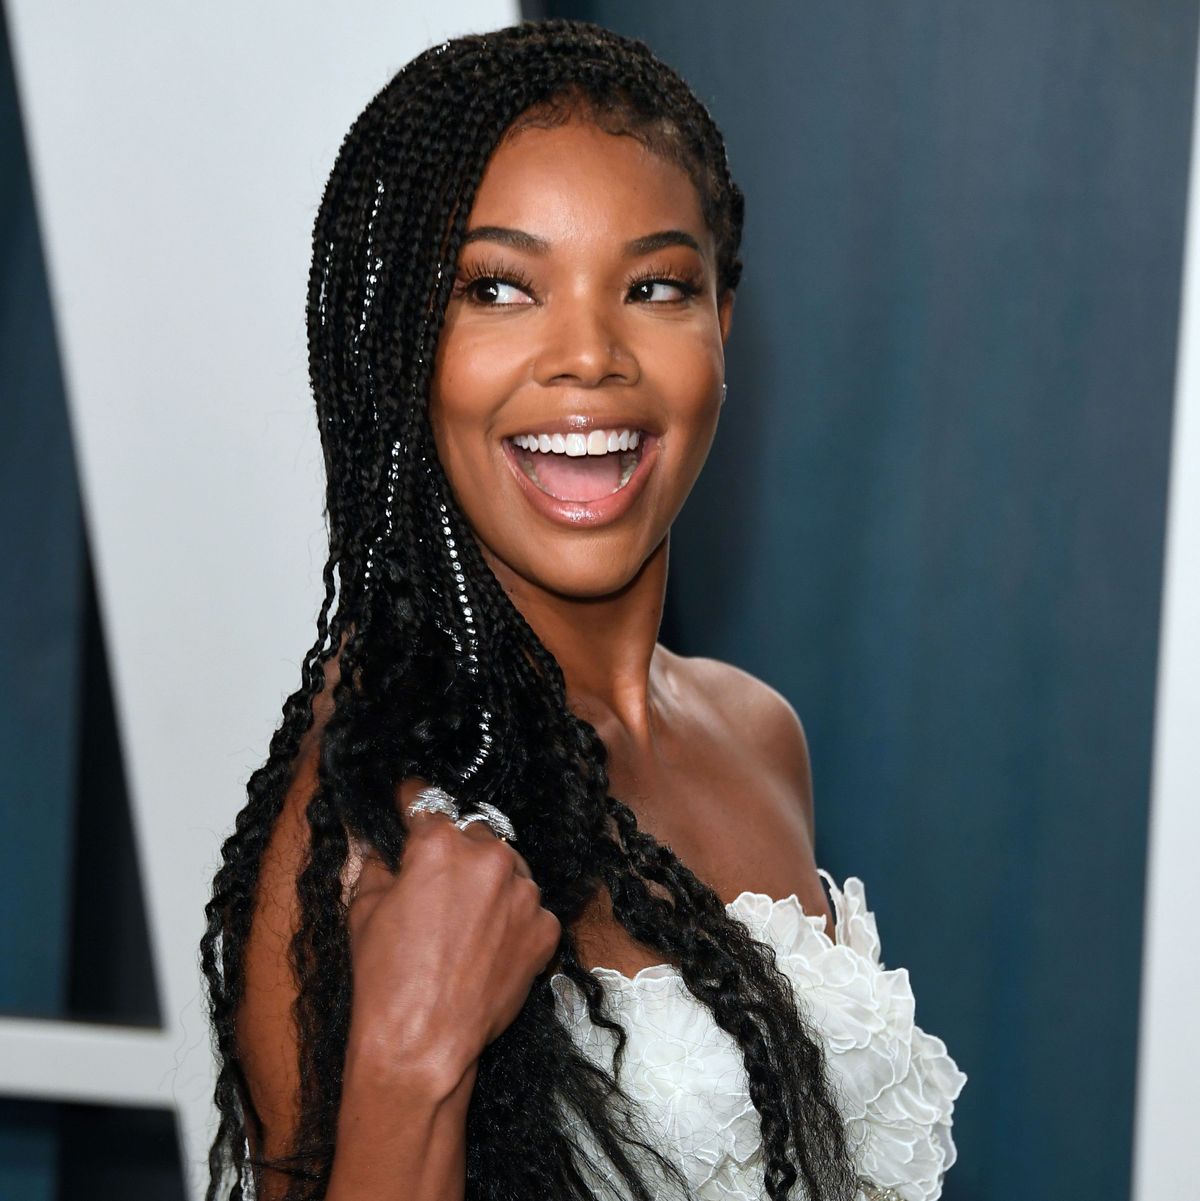 Gabrielle Union Debuted a New, Short Haircut on Instagram | Marie Claire